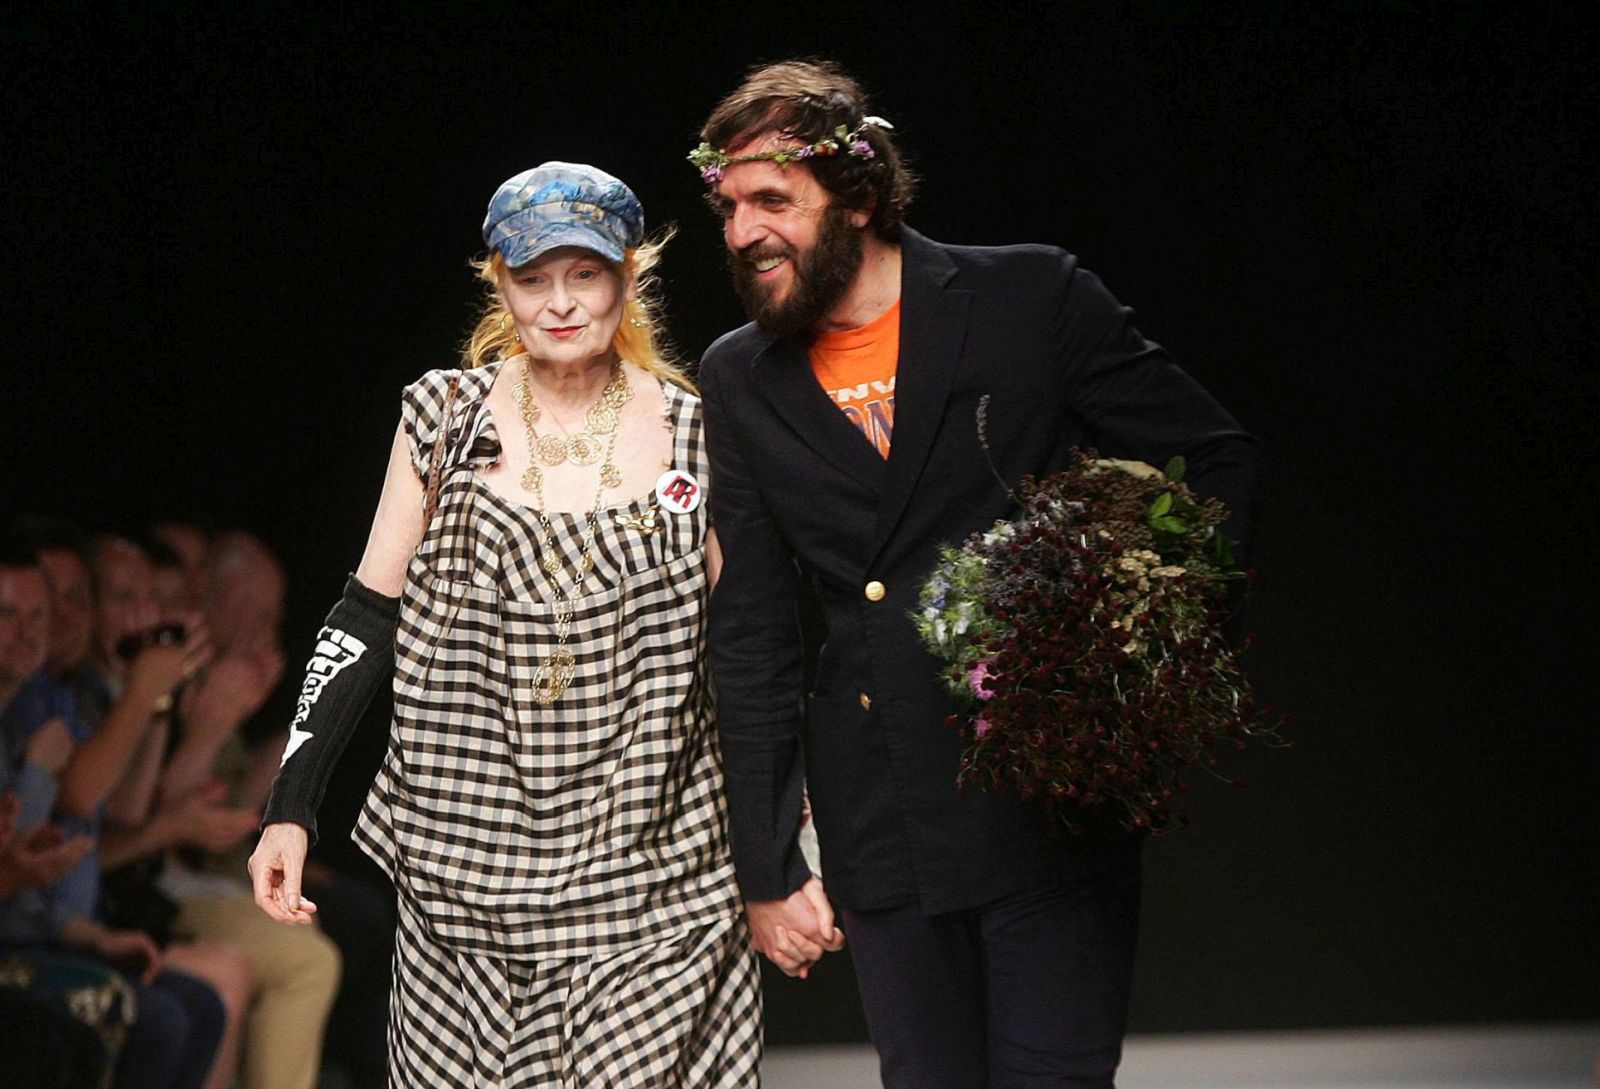 epa10381971 (FILE) - British fashion designer Vivienne Westwood (L) and husband Andreas Kronthaler (R) acknowledge the audience after the presentation of her  Spring/Summer 2013 Men's collection during the Milan Fashion Week, in Milan, Italy, 24 June 2012 (reissued 29 December 2022). Vivenne Westwood died on 29 December 2022 at the age of 81, according to a statement posted on her social media accounts.  EPA/MATTEO BAZZI *** Local Caption *** 50402100